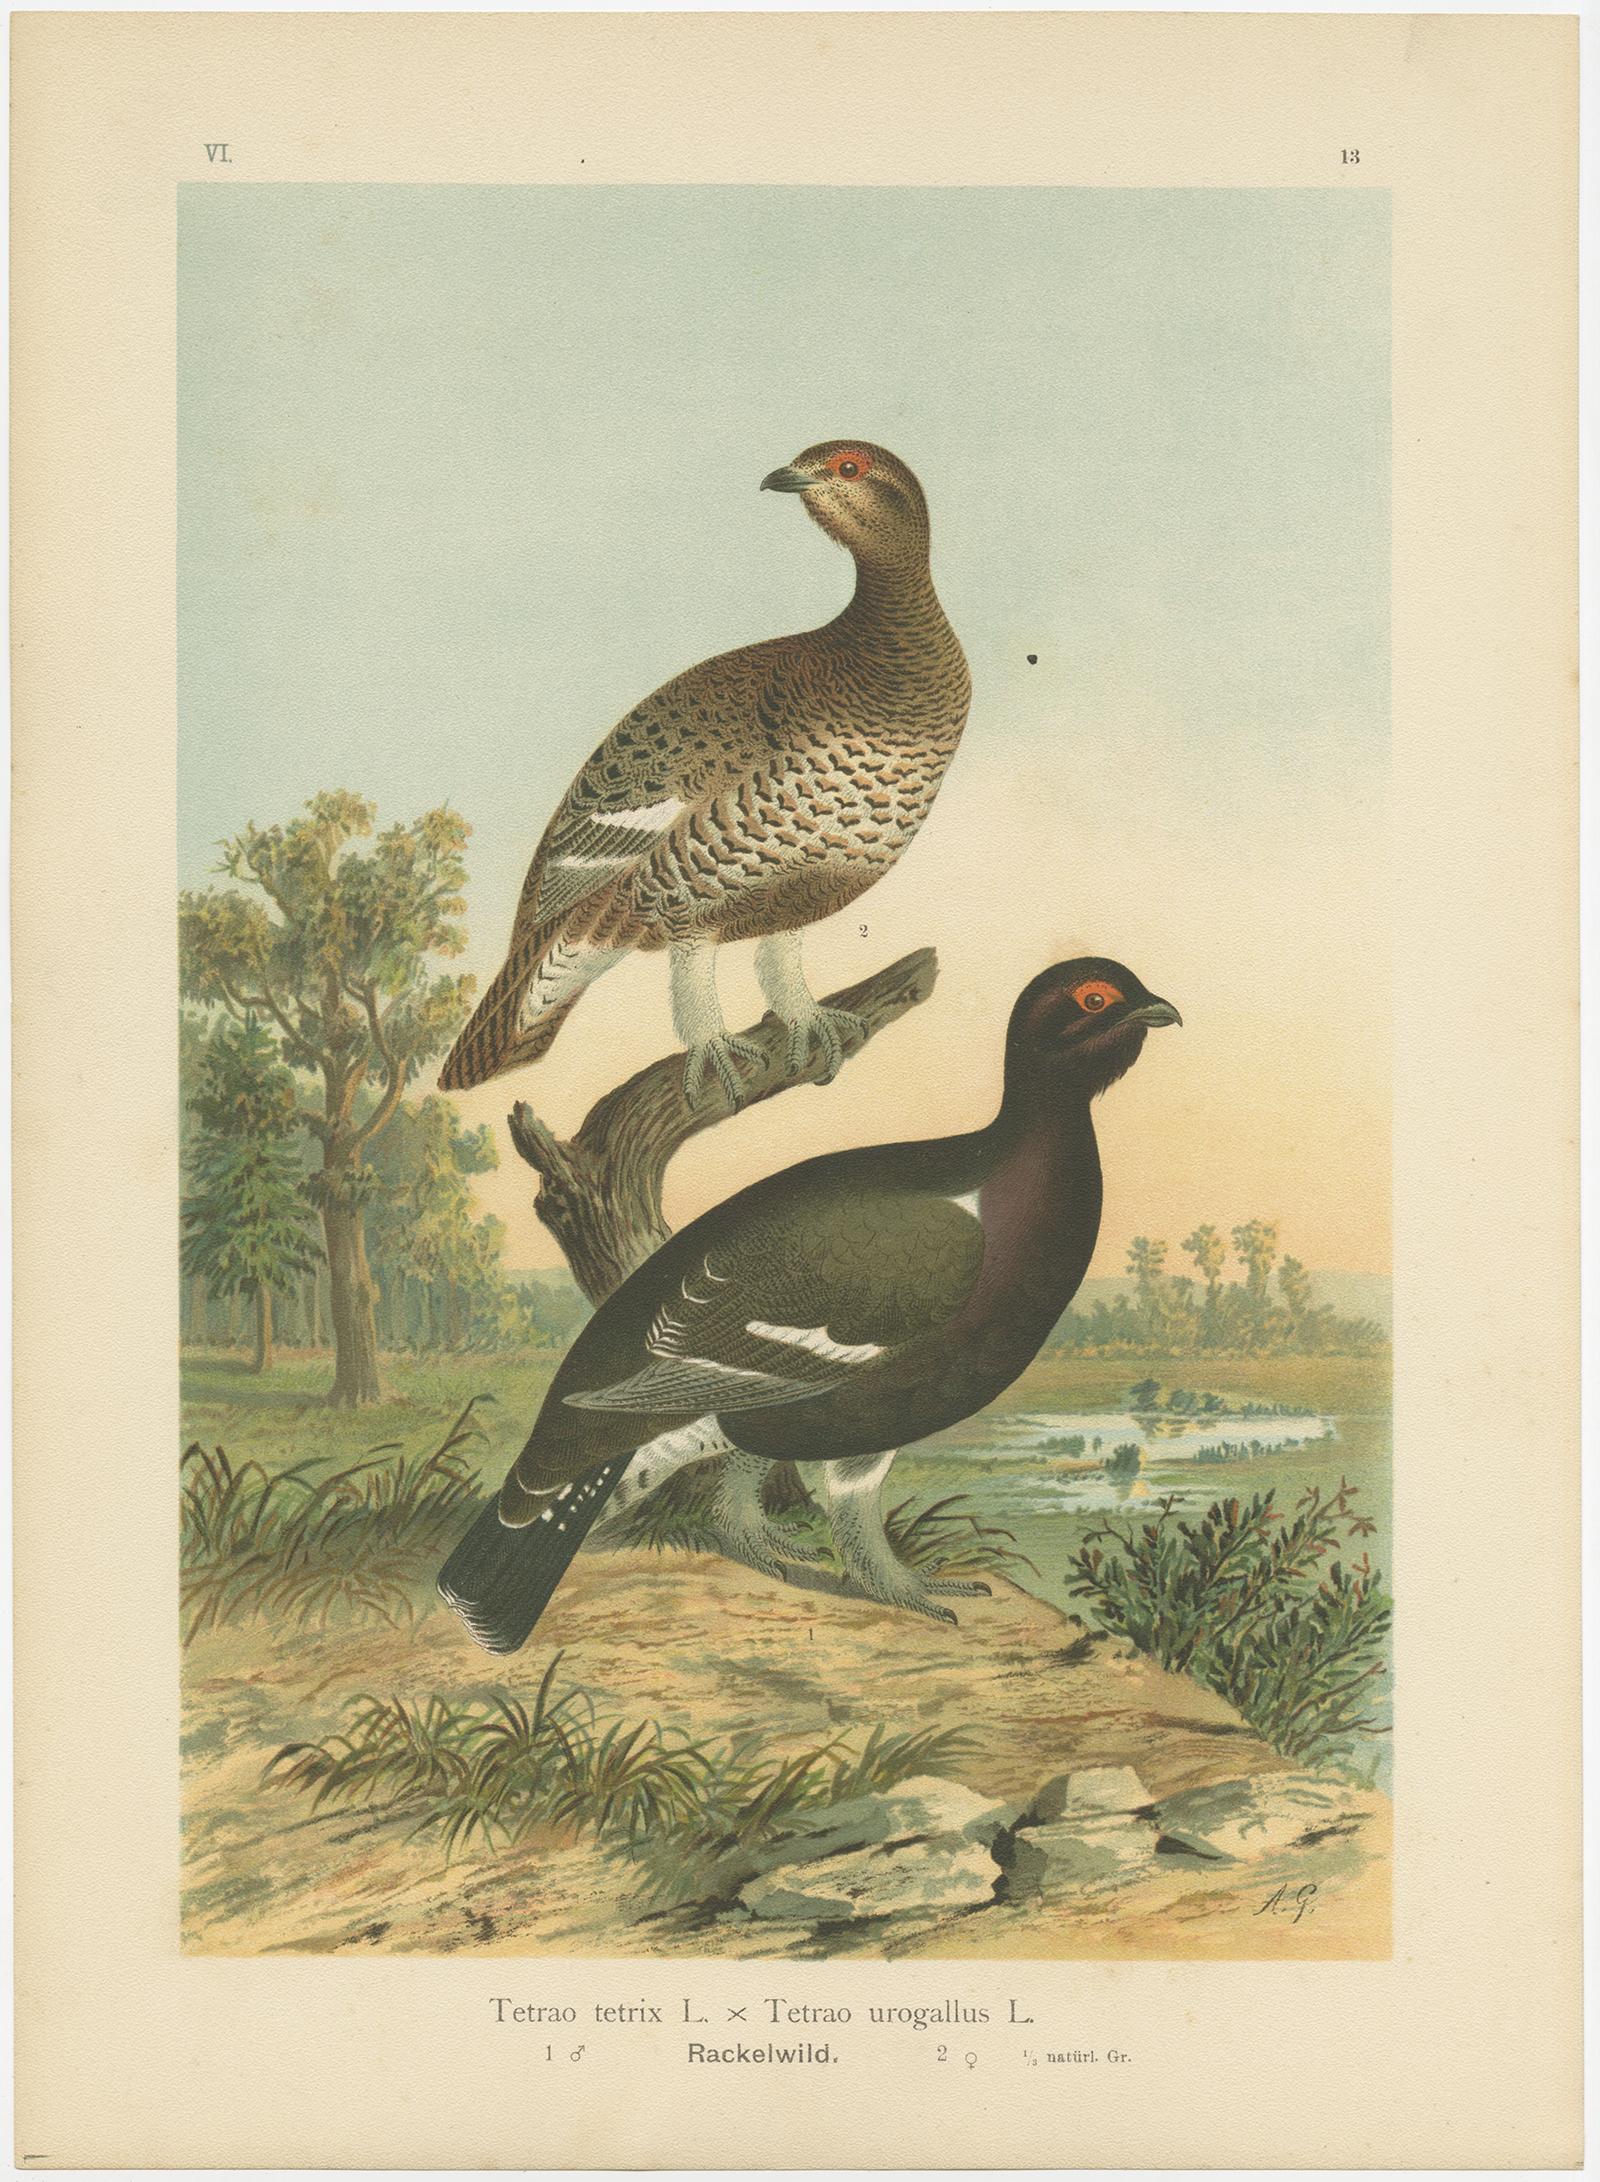 This antique bird print featuring 'Tetrao Tetrix x Tetrao Urogallus - Rackelwild' is a chromolithograph representing a hybrid between the Black Grouse (Tetrao tetrix) and the Western Capercaillie (Tetrao urogallus), commonly known as Rackelhahn. The